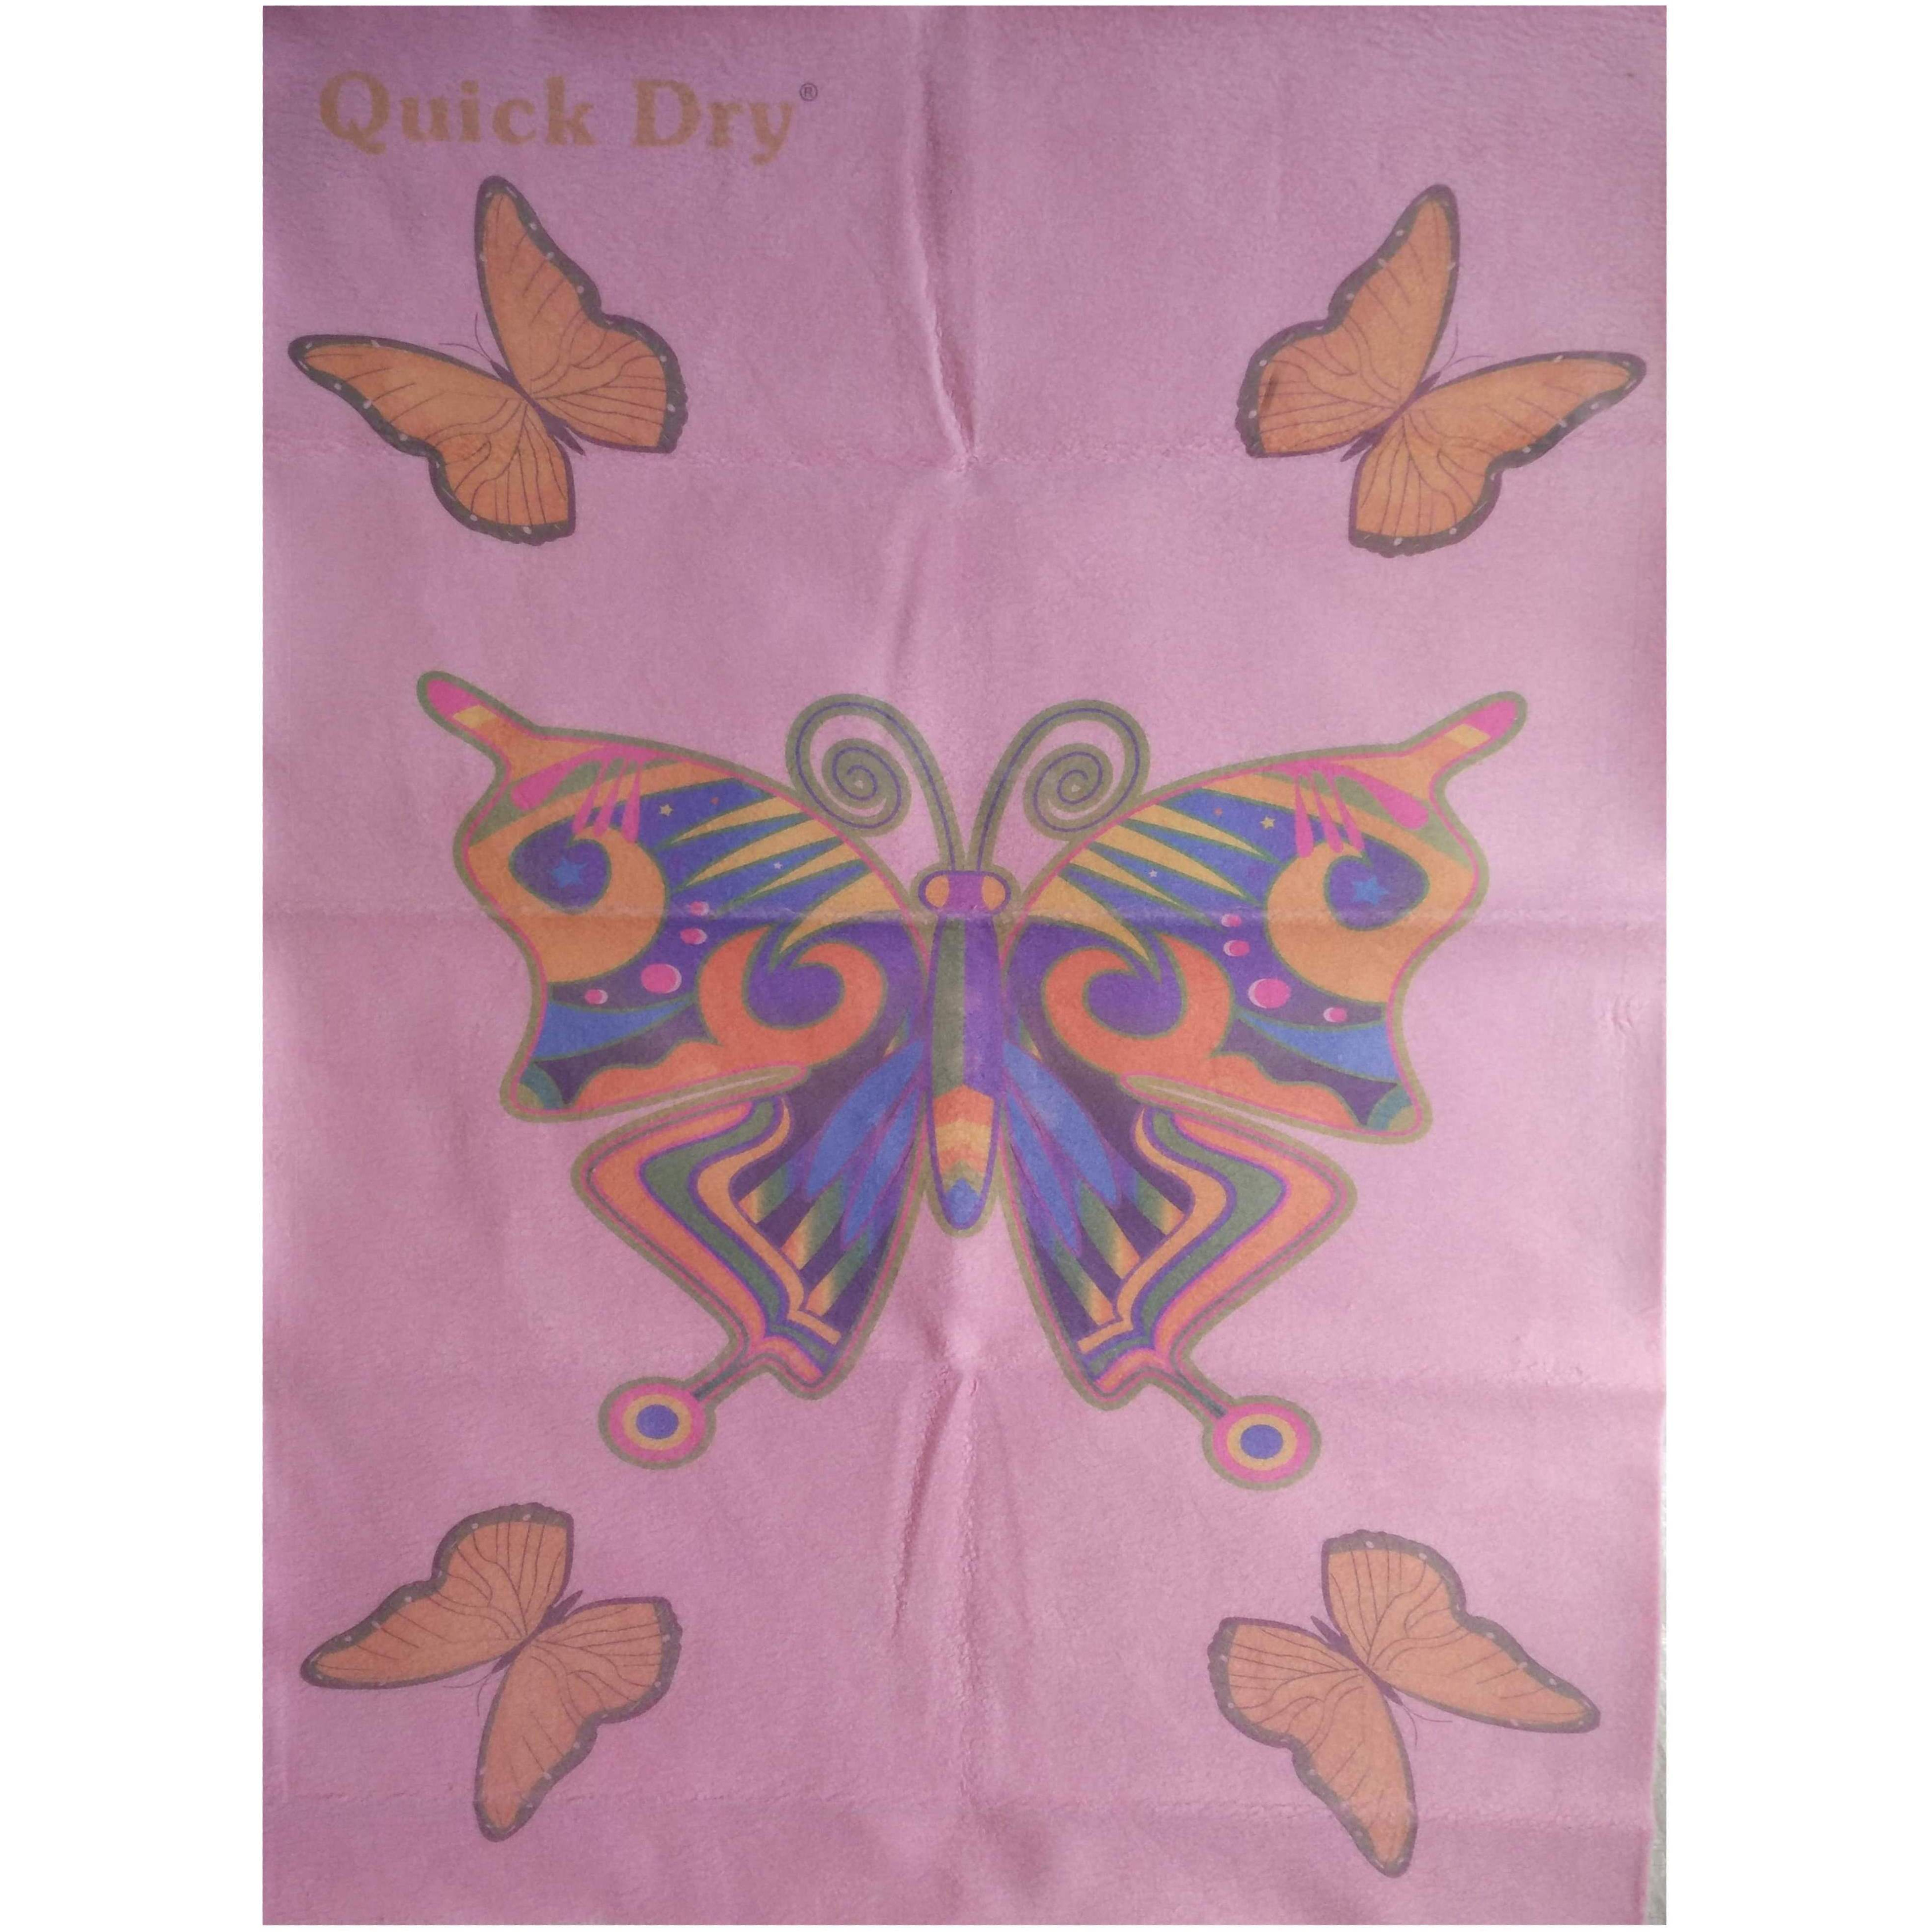 Quick Dry Bed Protector Printed - 623 S Pink